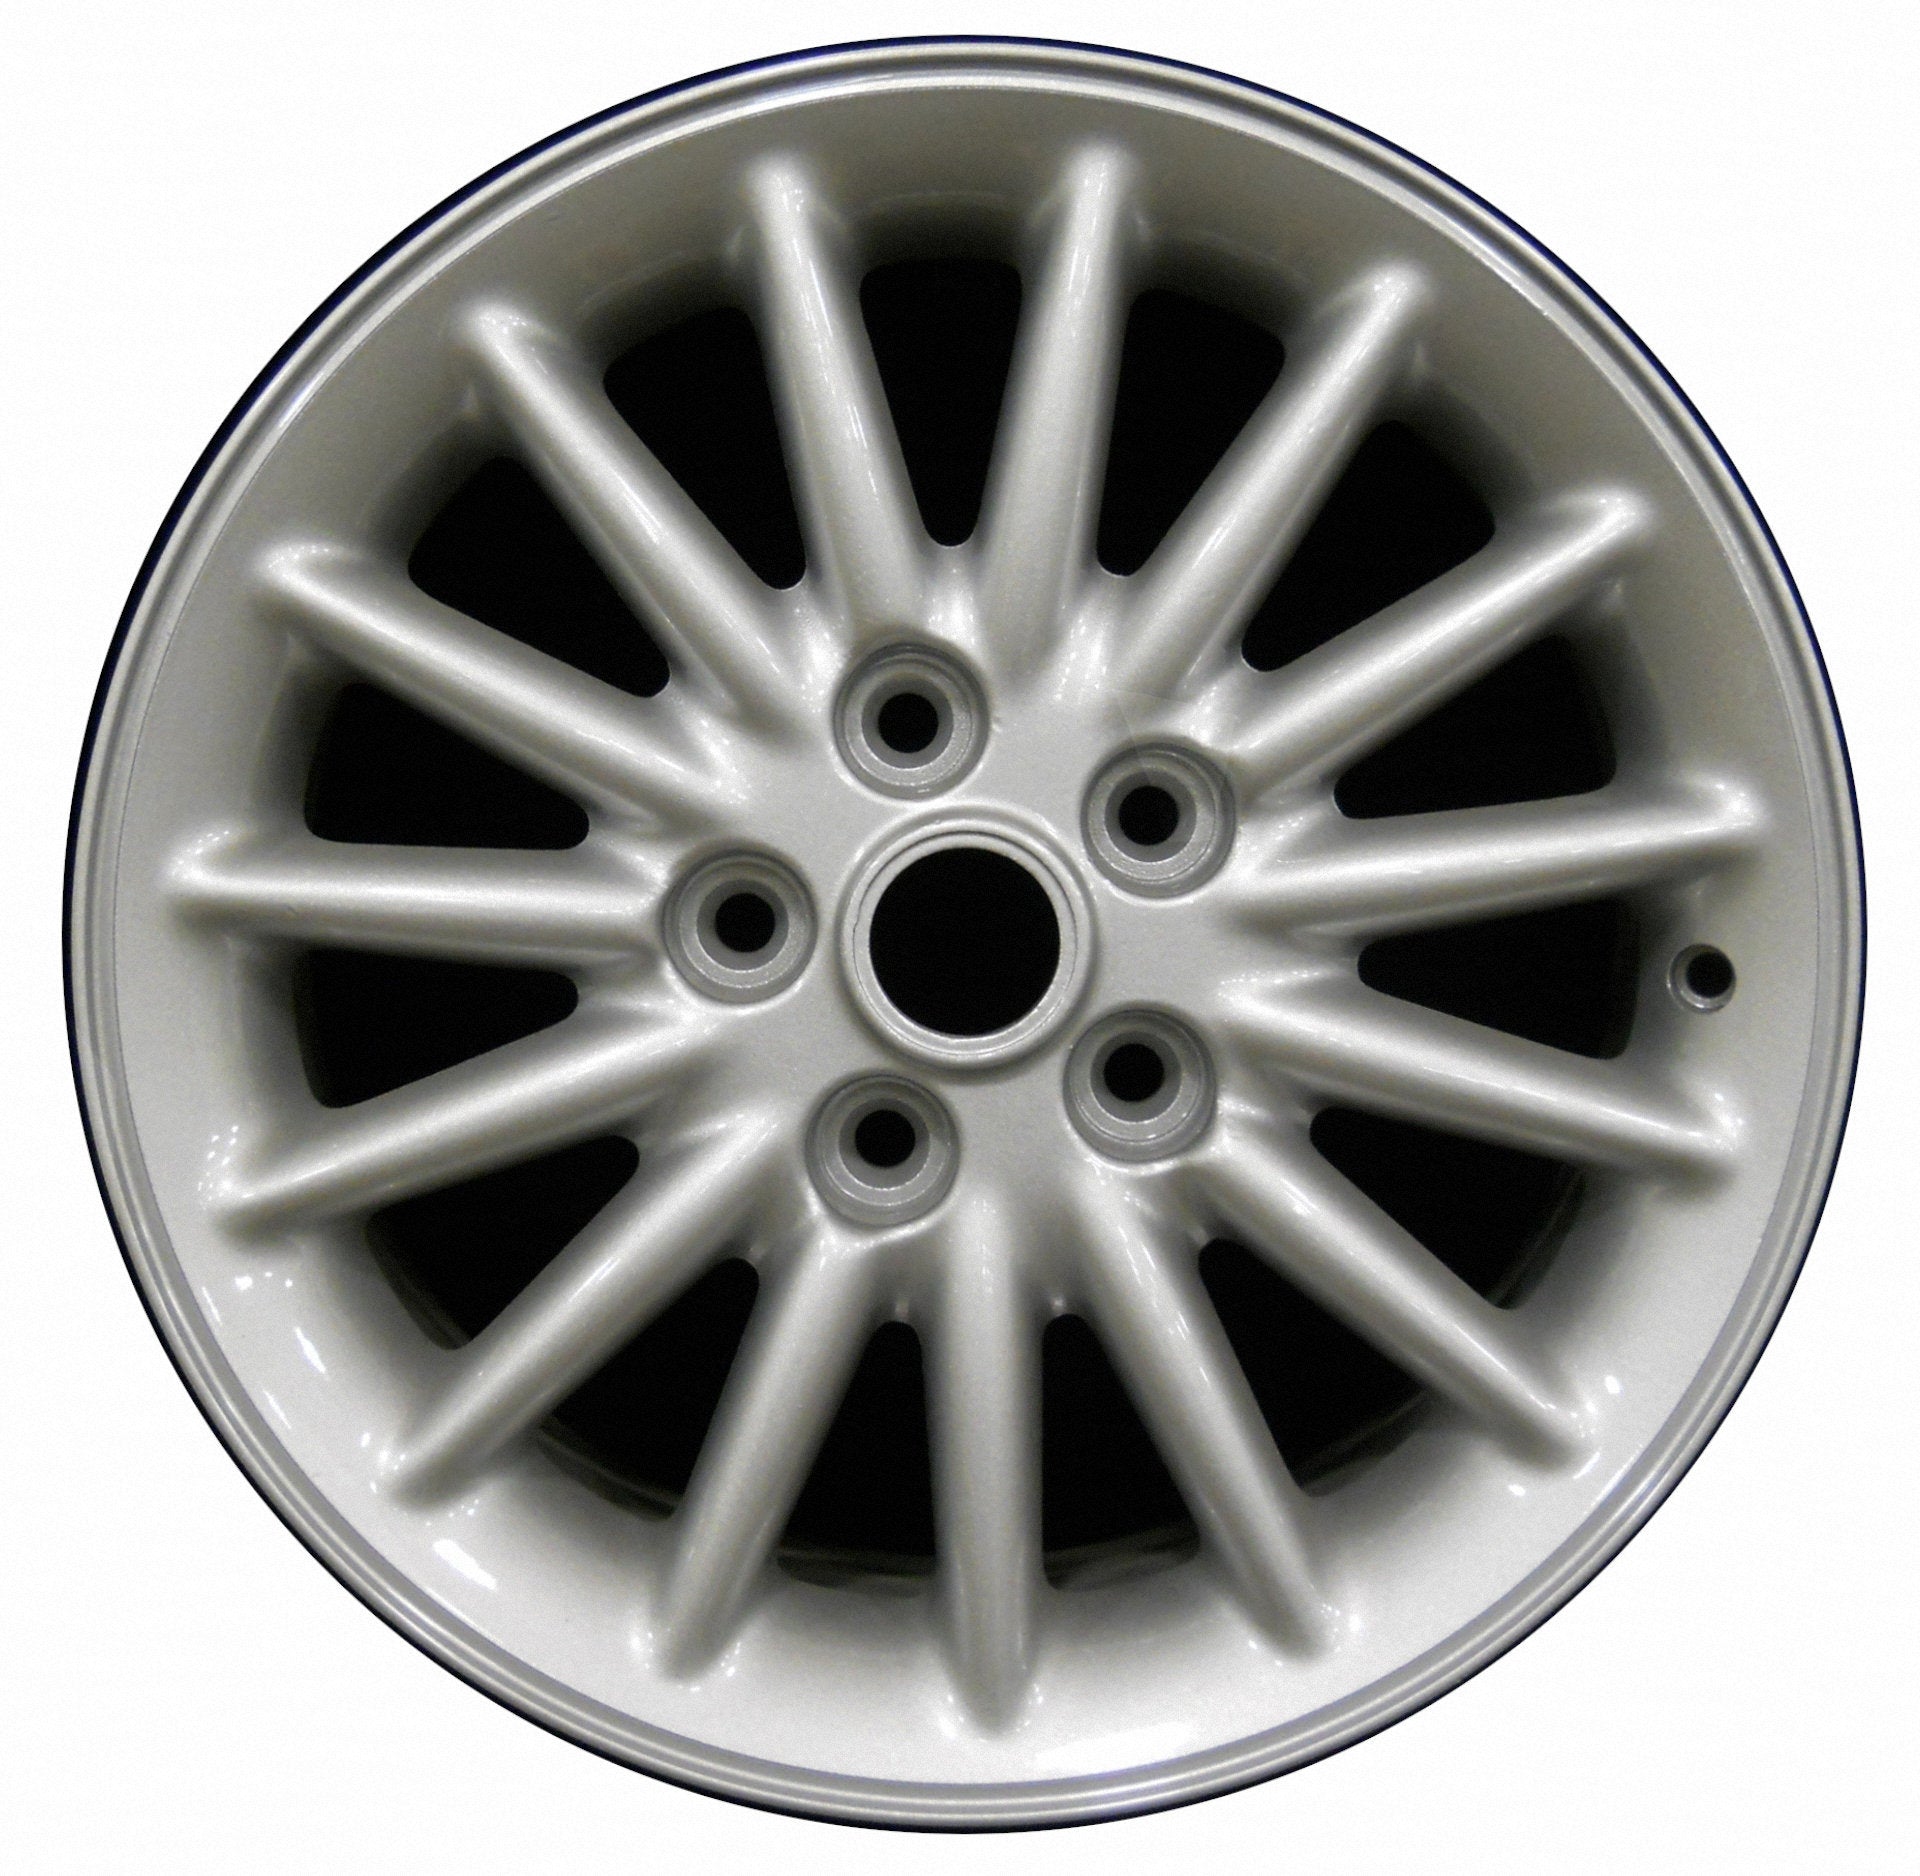 Chrysler Town & Country  1999, 2000 Factory OEM Car Wheel Size 16x6.5 Alloy WAO.2107.PS09.FF